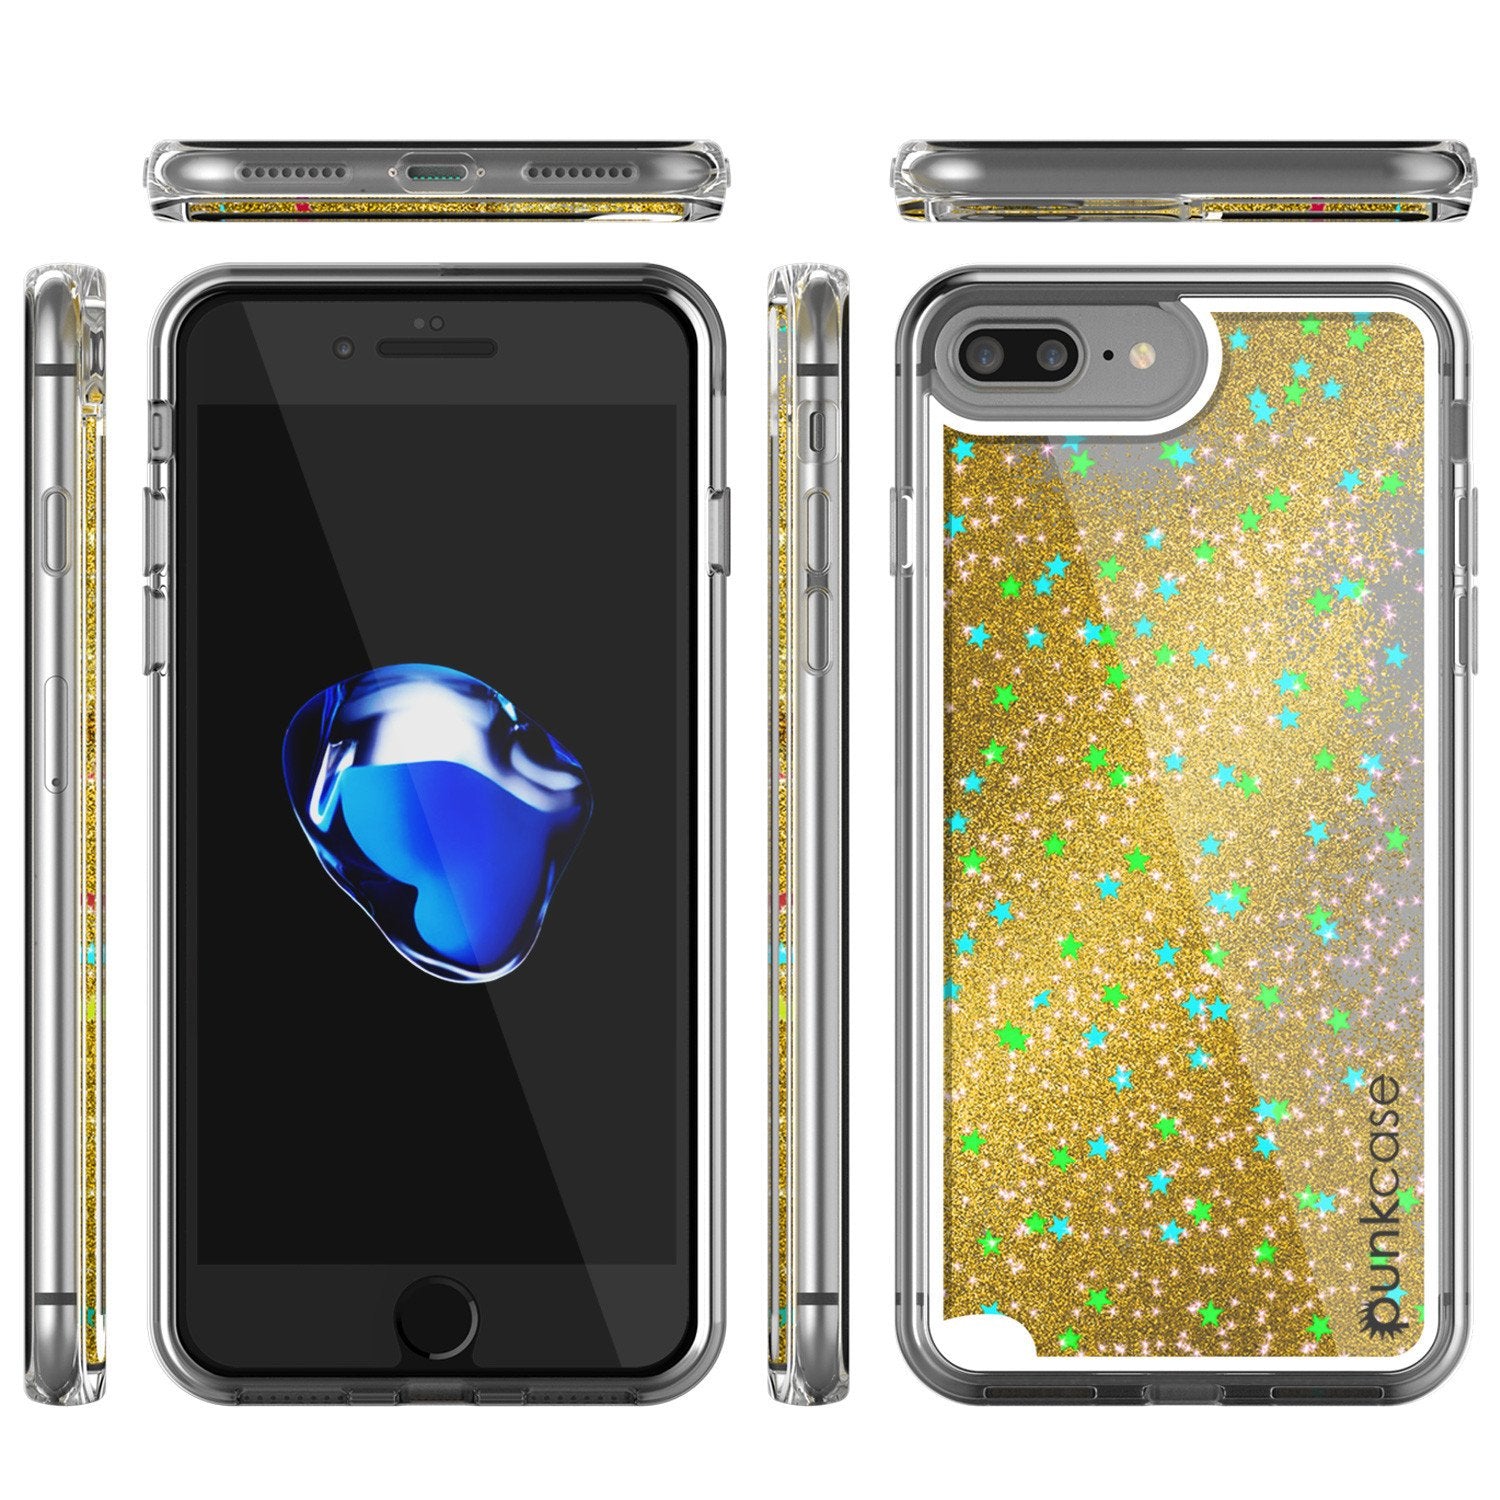 iPhone 7 Plus Case, Punkcase [Liquid Gold Series] Protective Dual Layer Floating Glitter Cover with lots of Bling & Sparkle + 0.3mm Tempered Glass Screen Protector for Apple iPhone 7s Plus